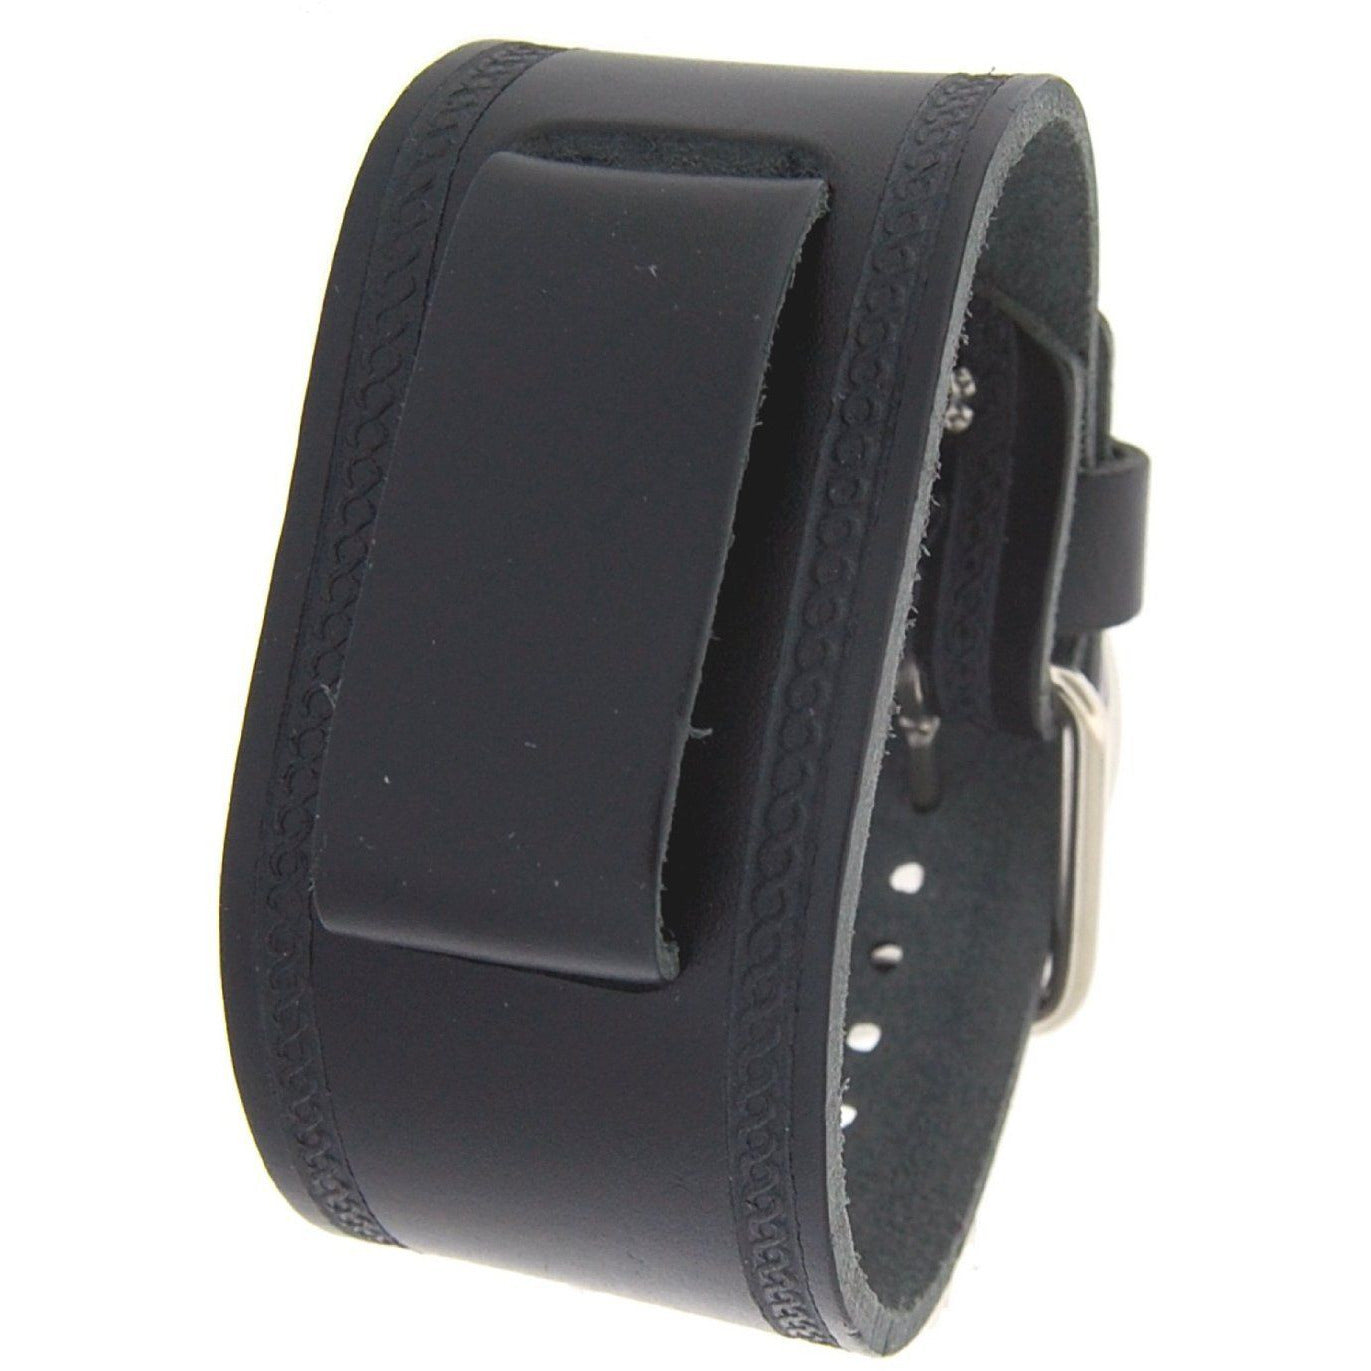 Racing Sport Black Watch with Embossed Black Leather Cuff